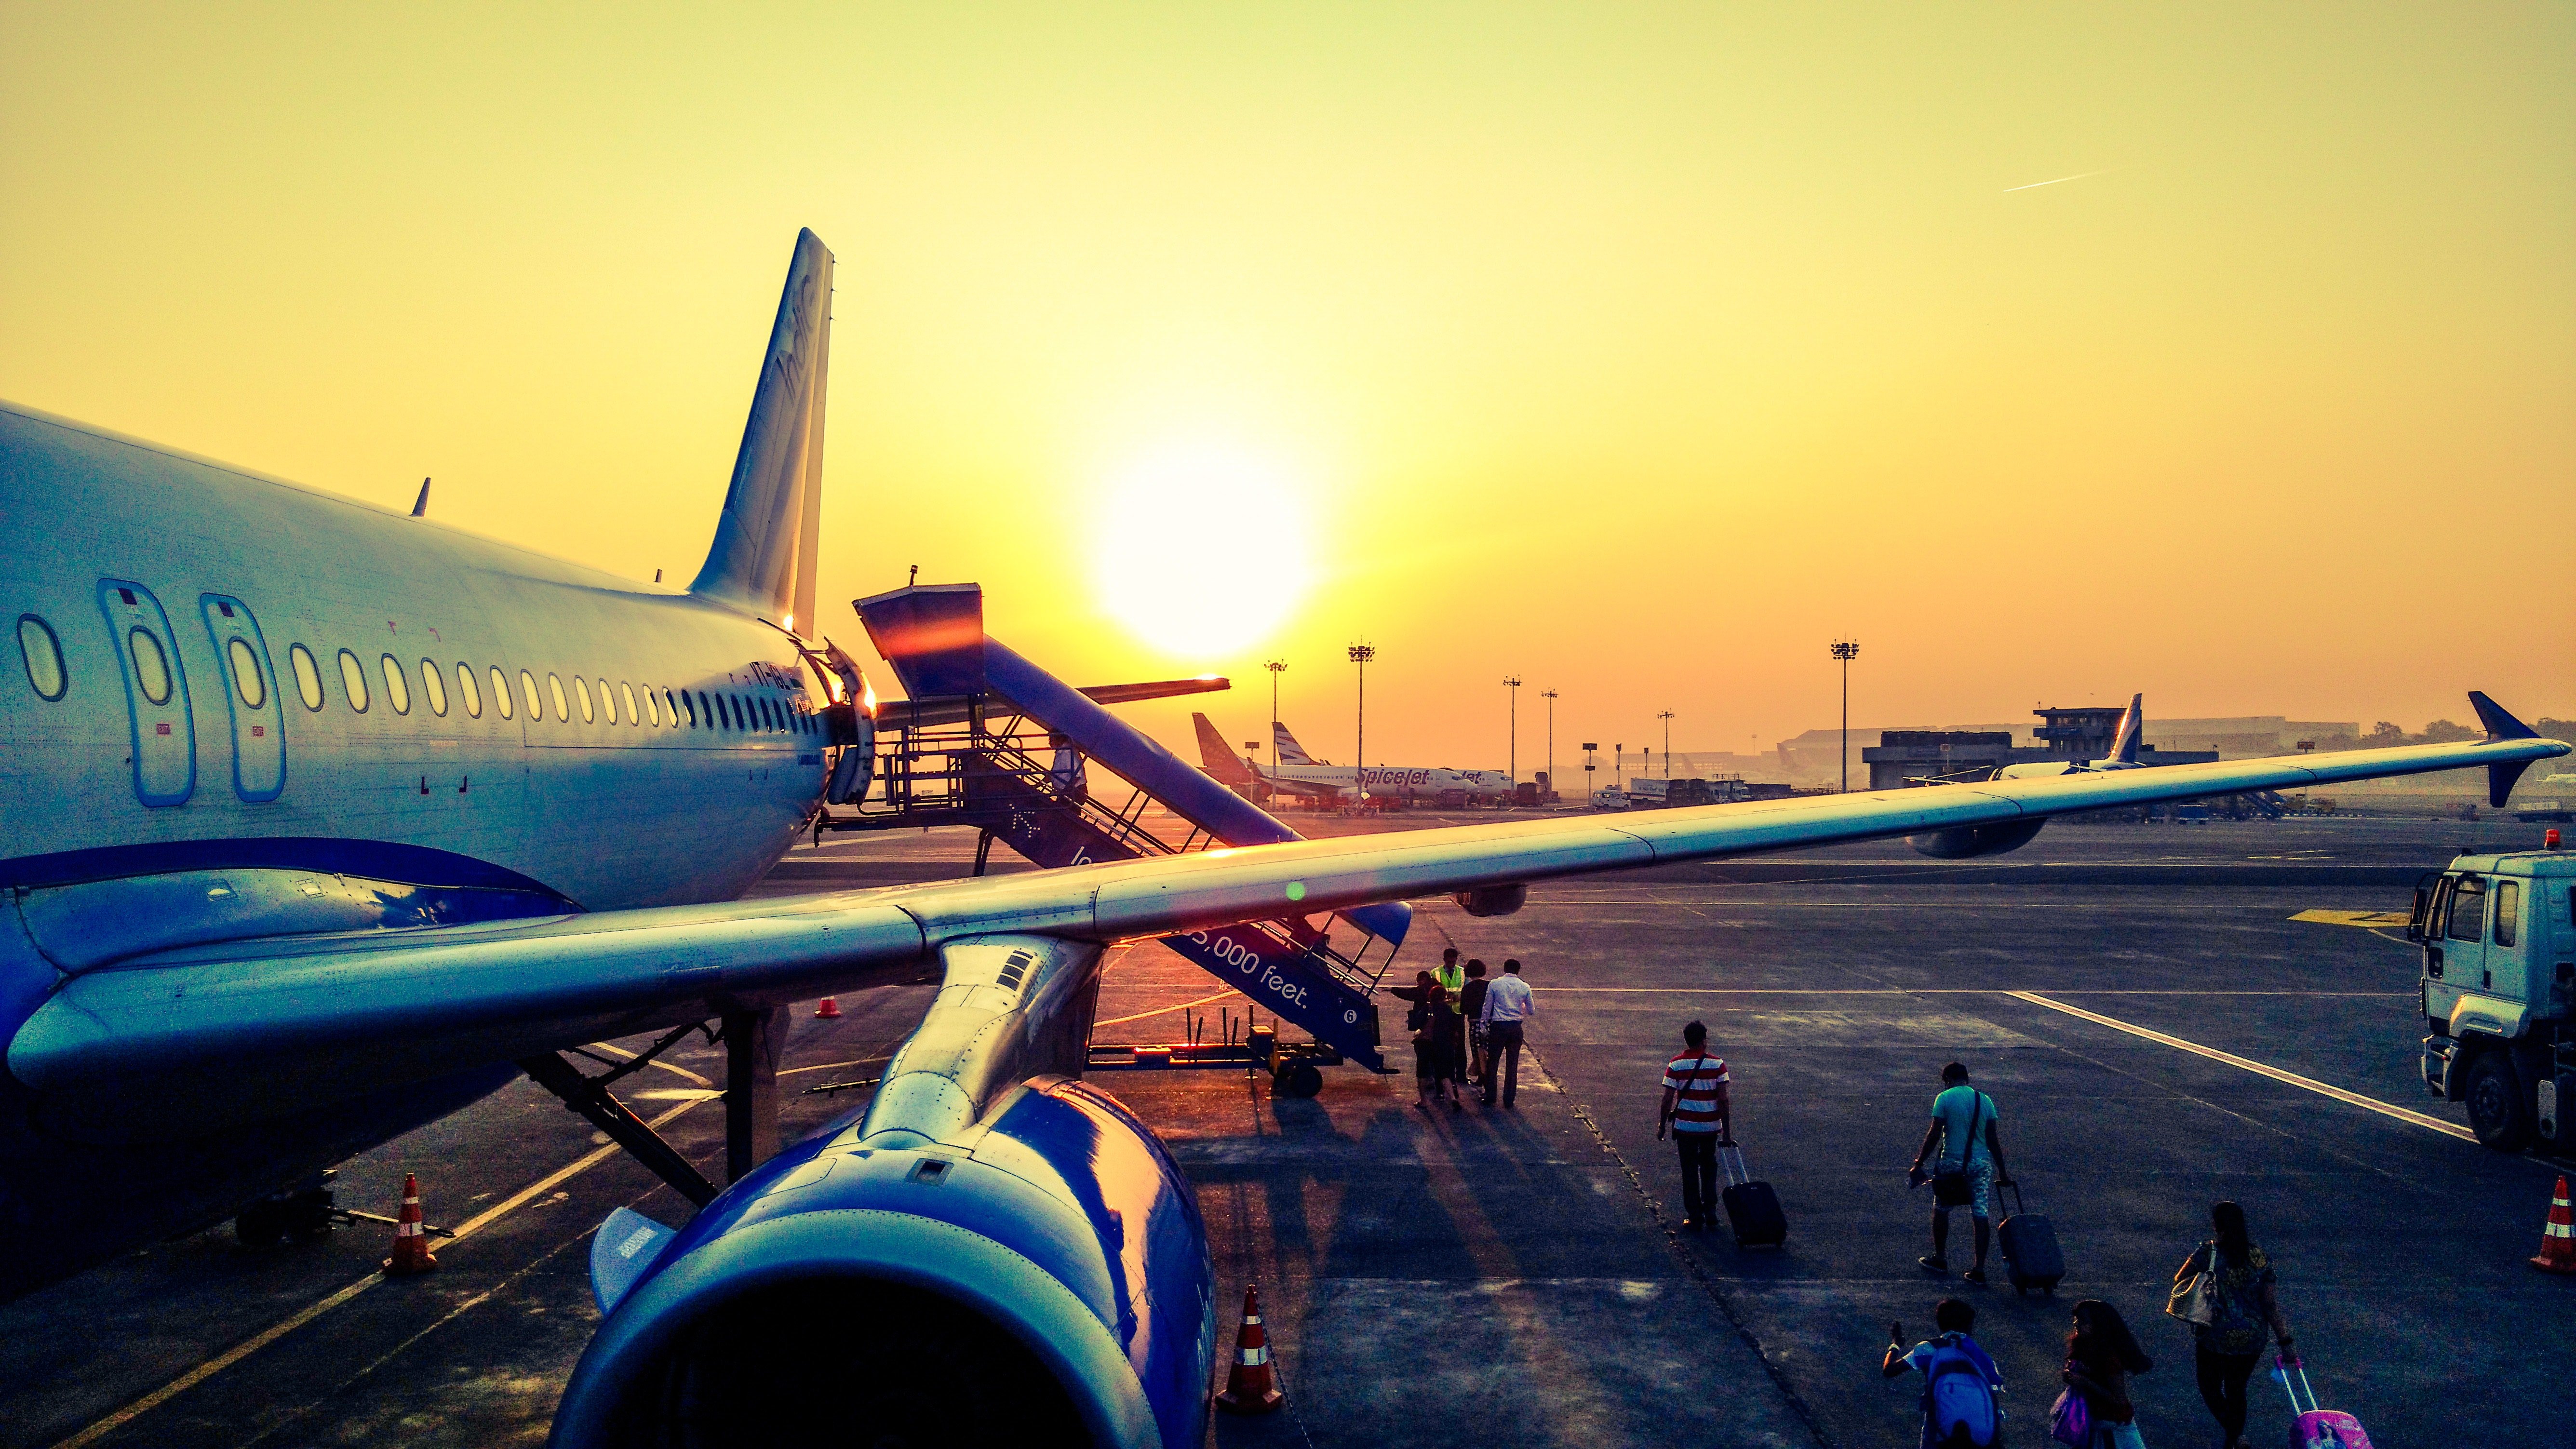 Pictured - Passengers boarding a plane | Source: Pexels 